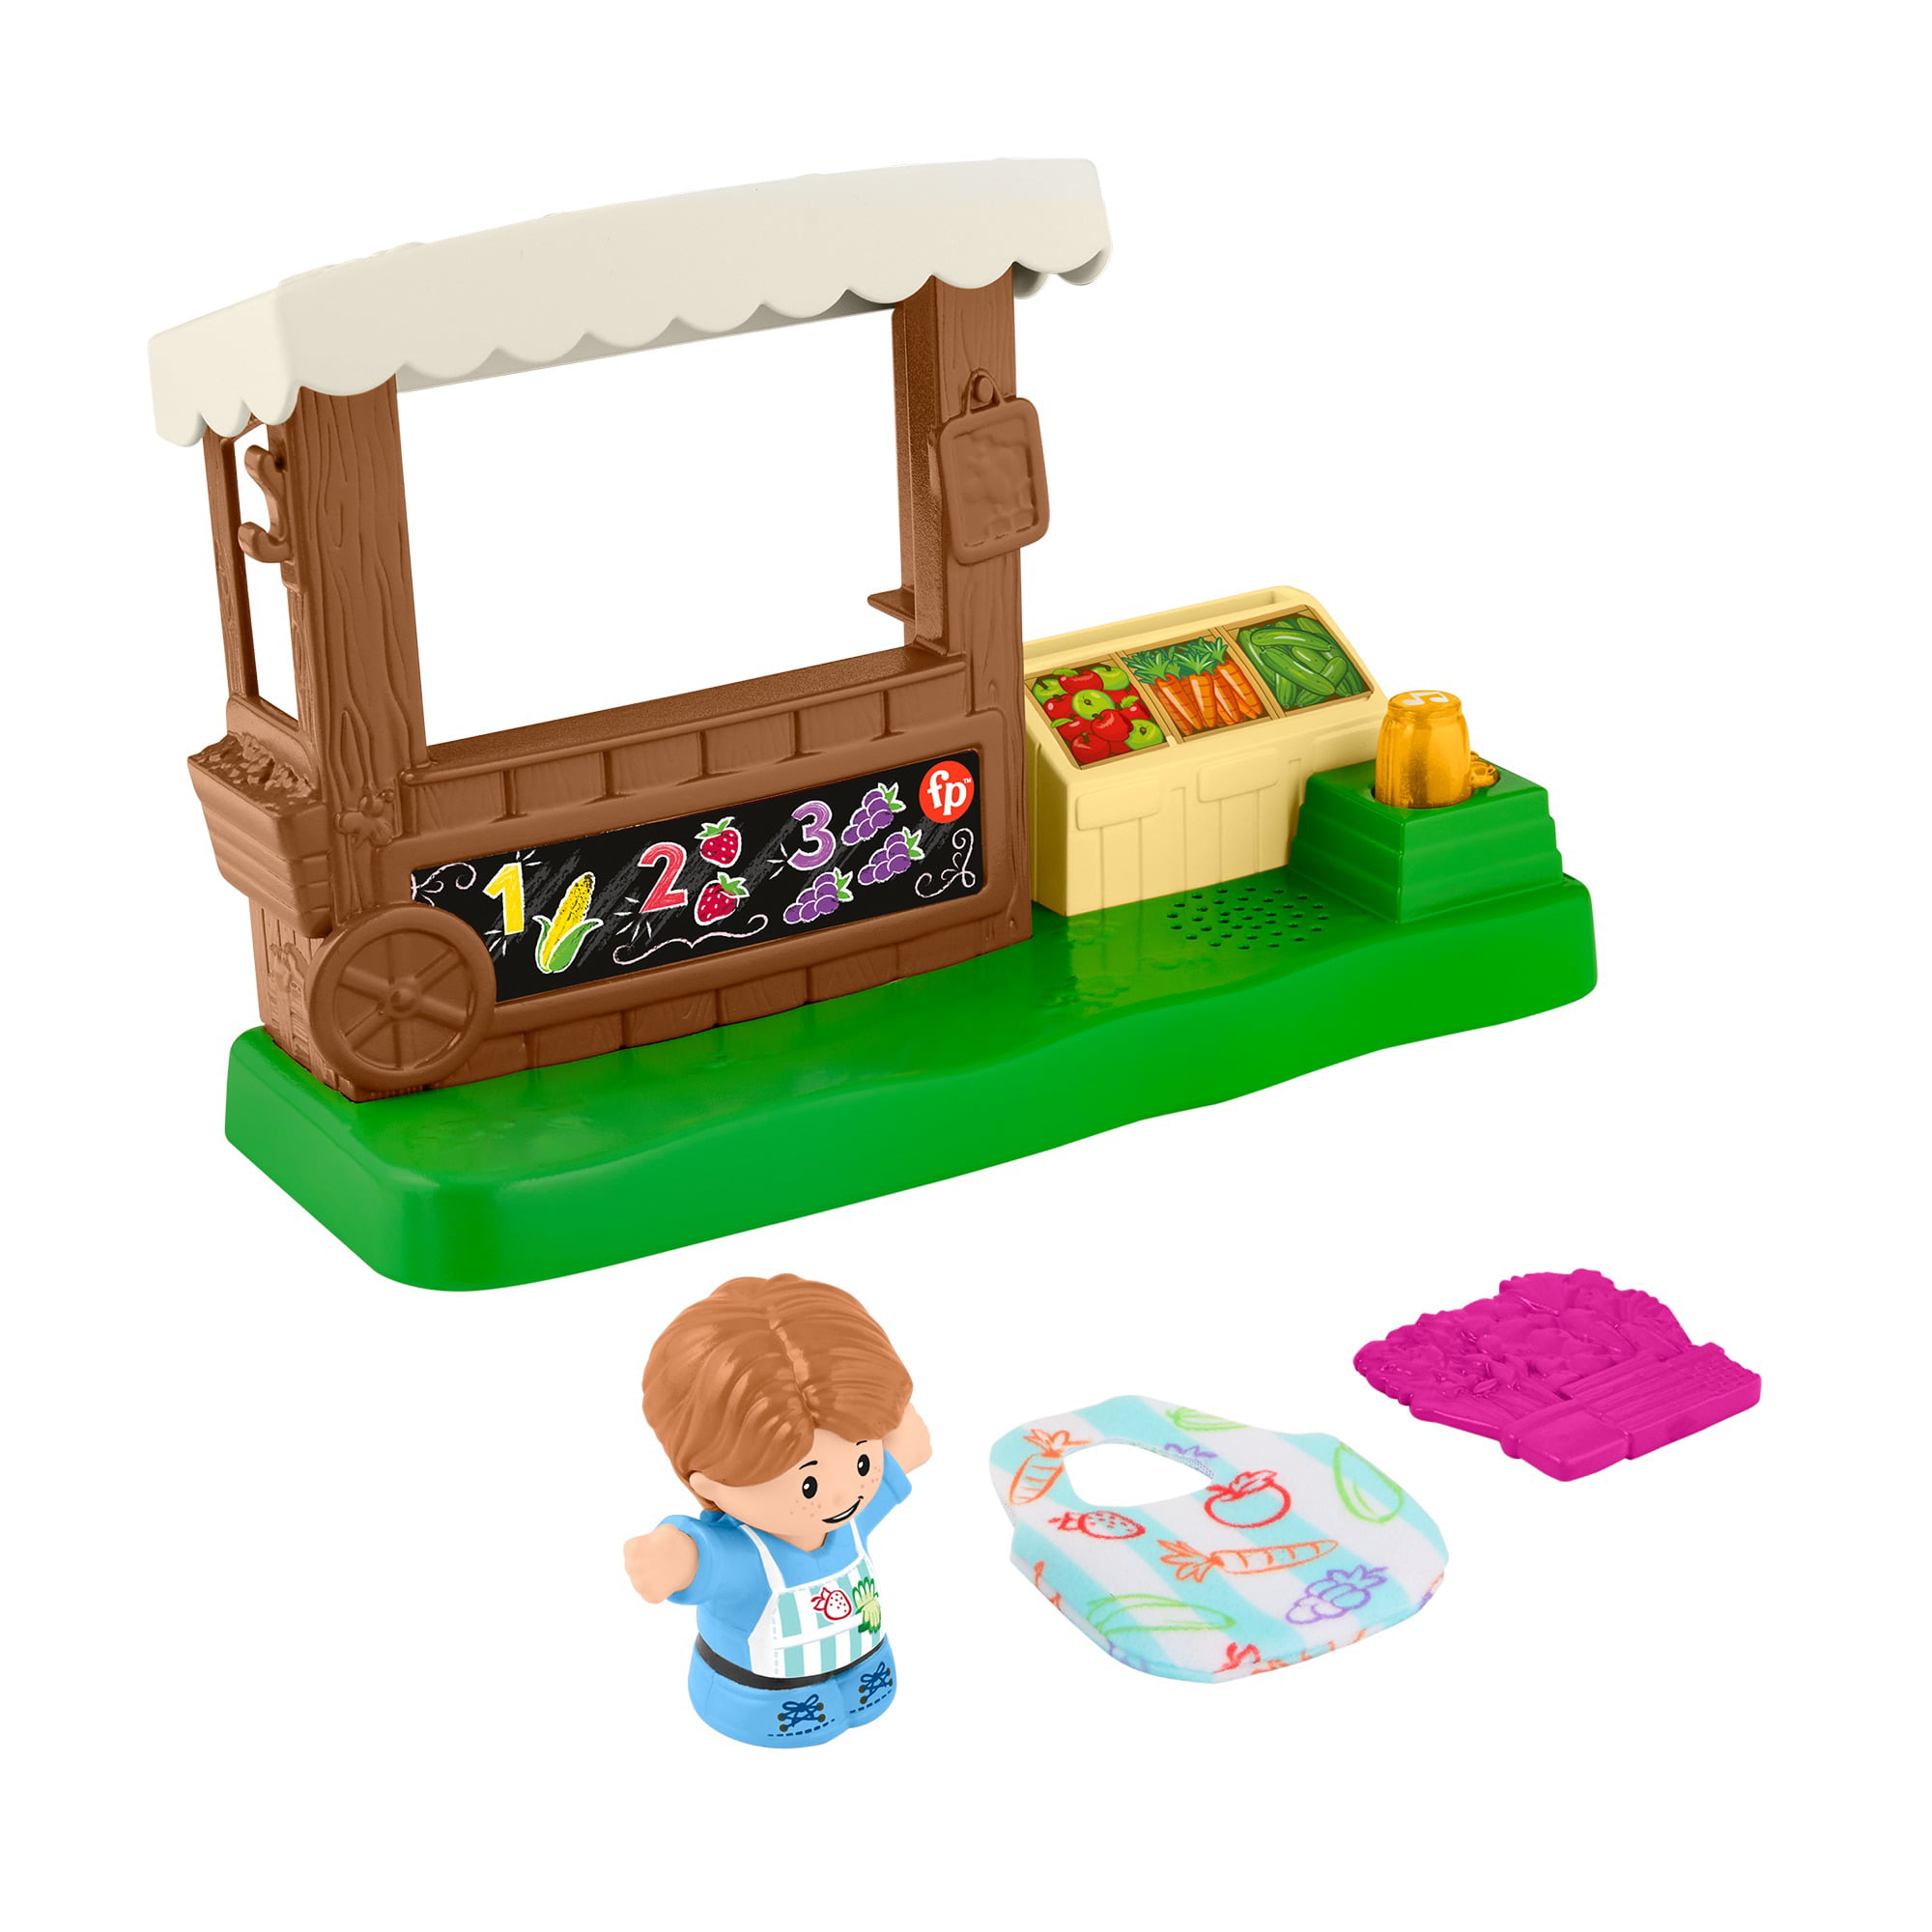 AllYourNeed 14 pieces Jesus and Friends Wood Play Set